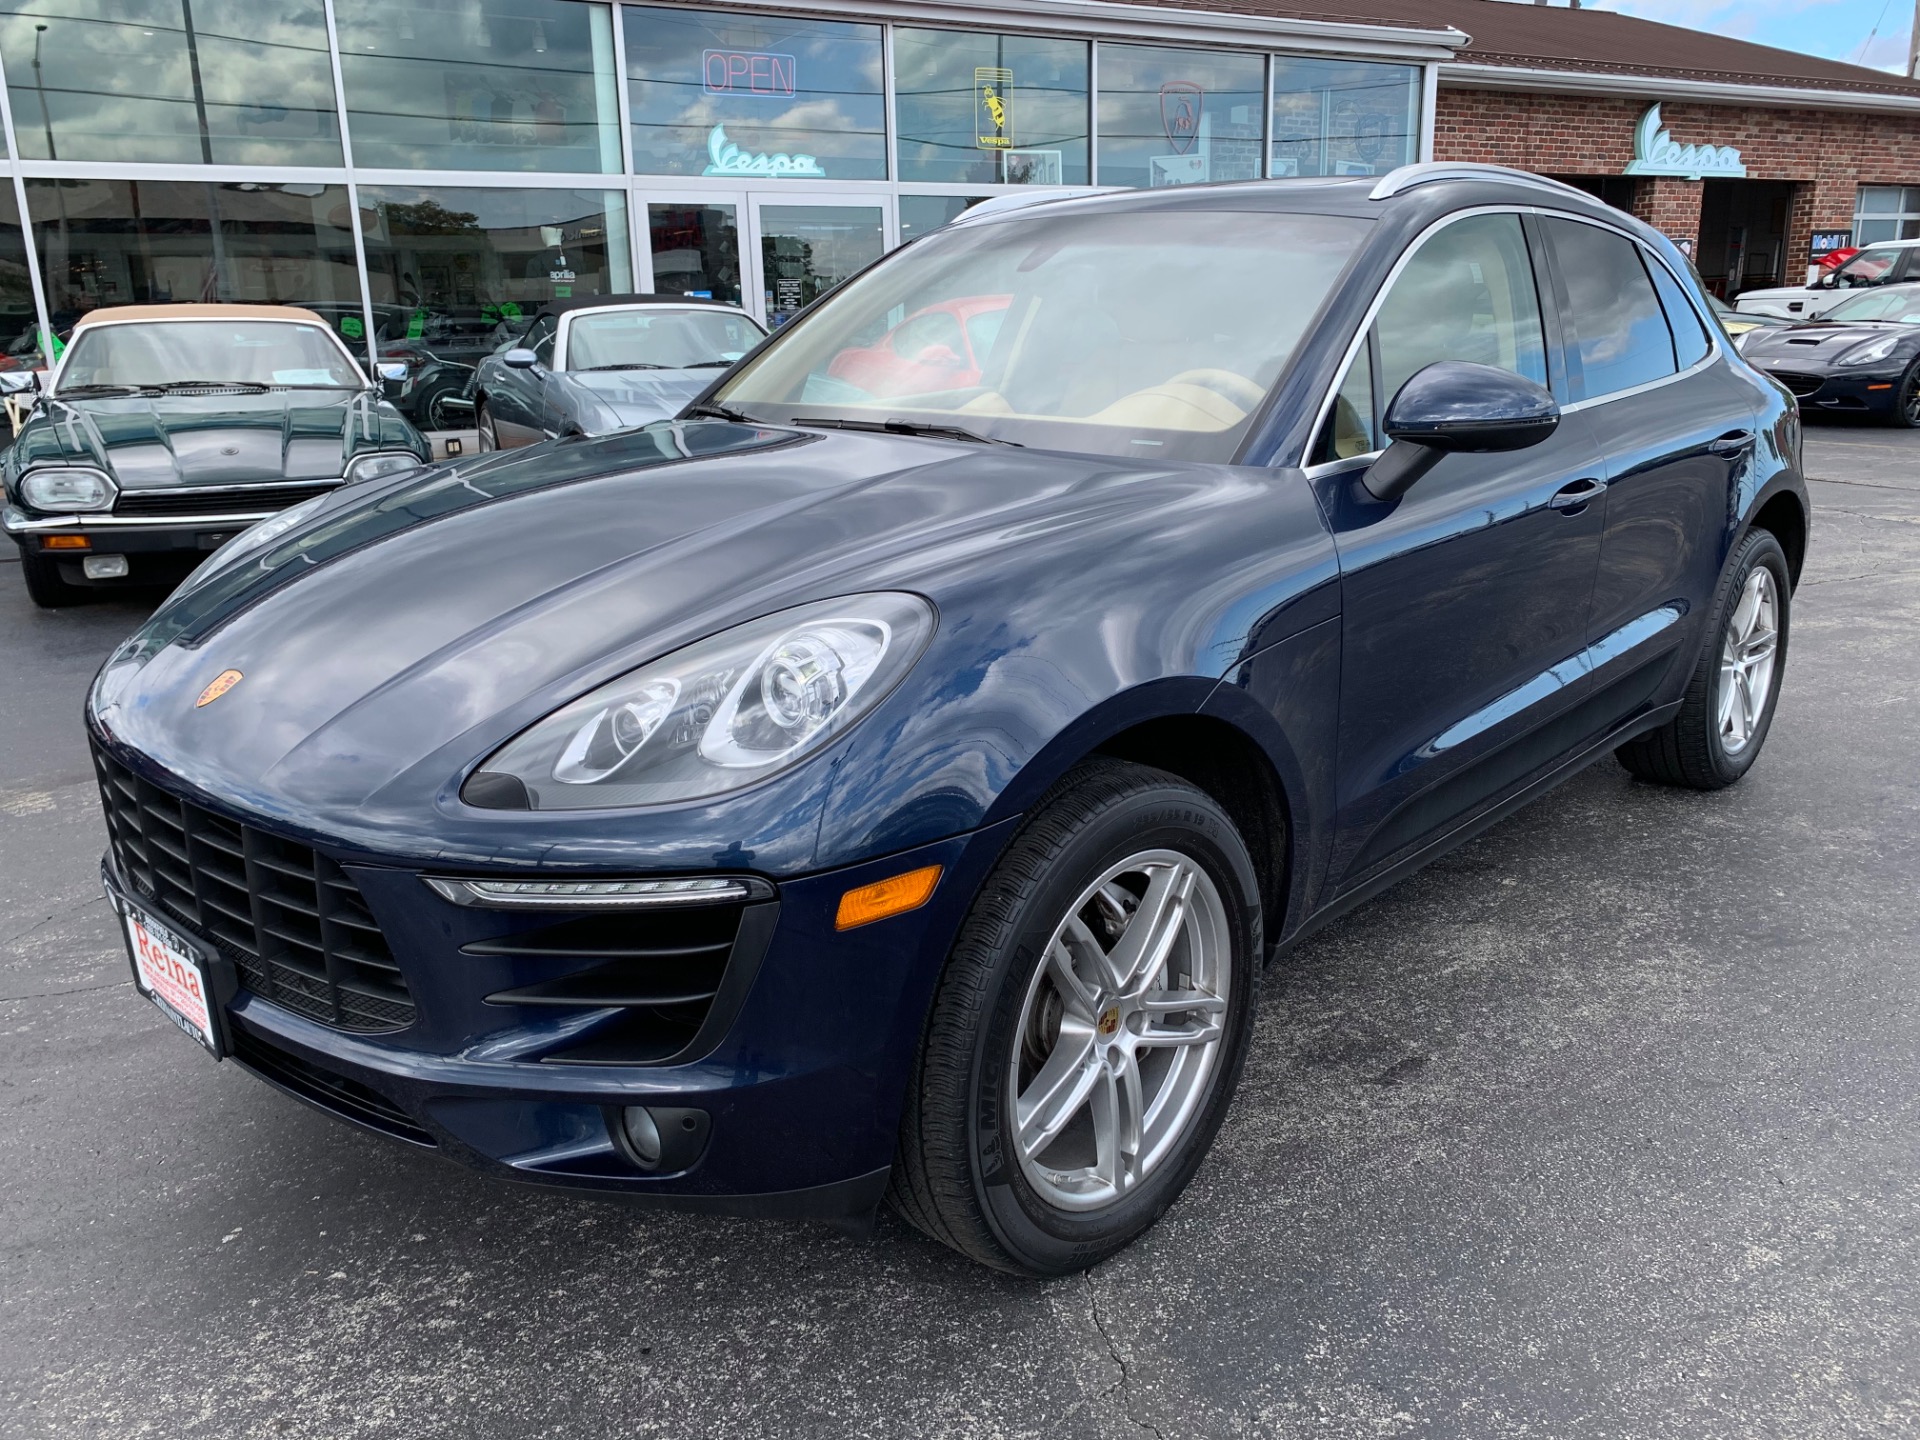 Used-2015-Porsche-Macan-S-AWD